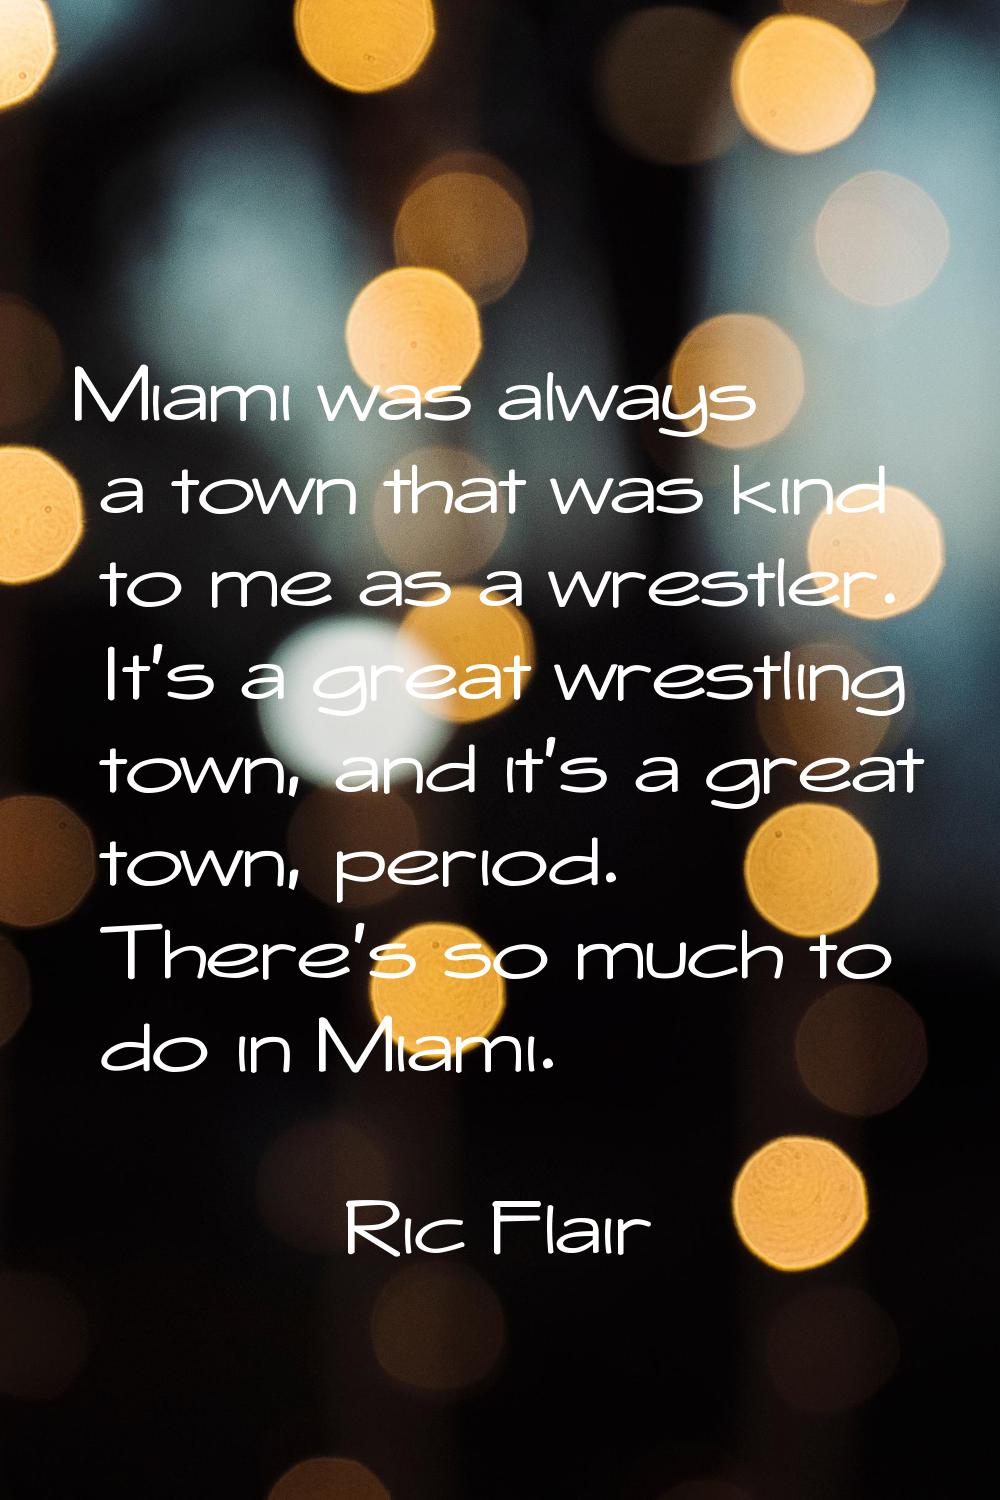 Miami was always a town that was kind to me as a wrestler. It's a great wrestling town, and it's a 